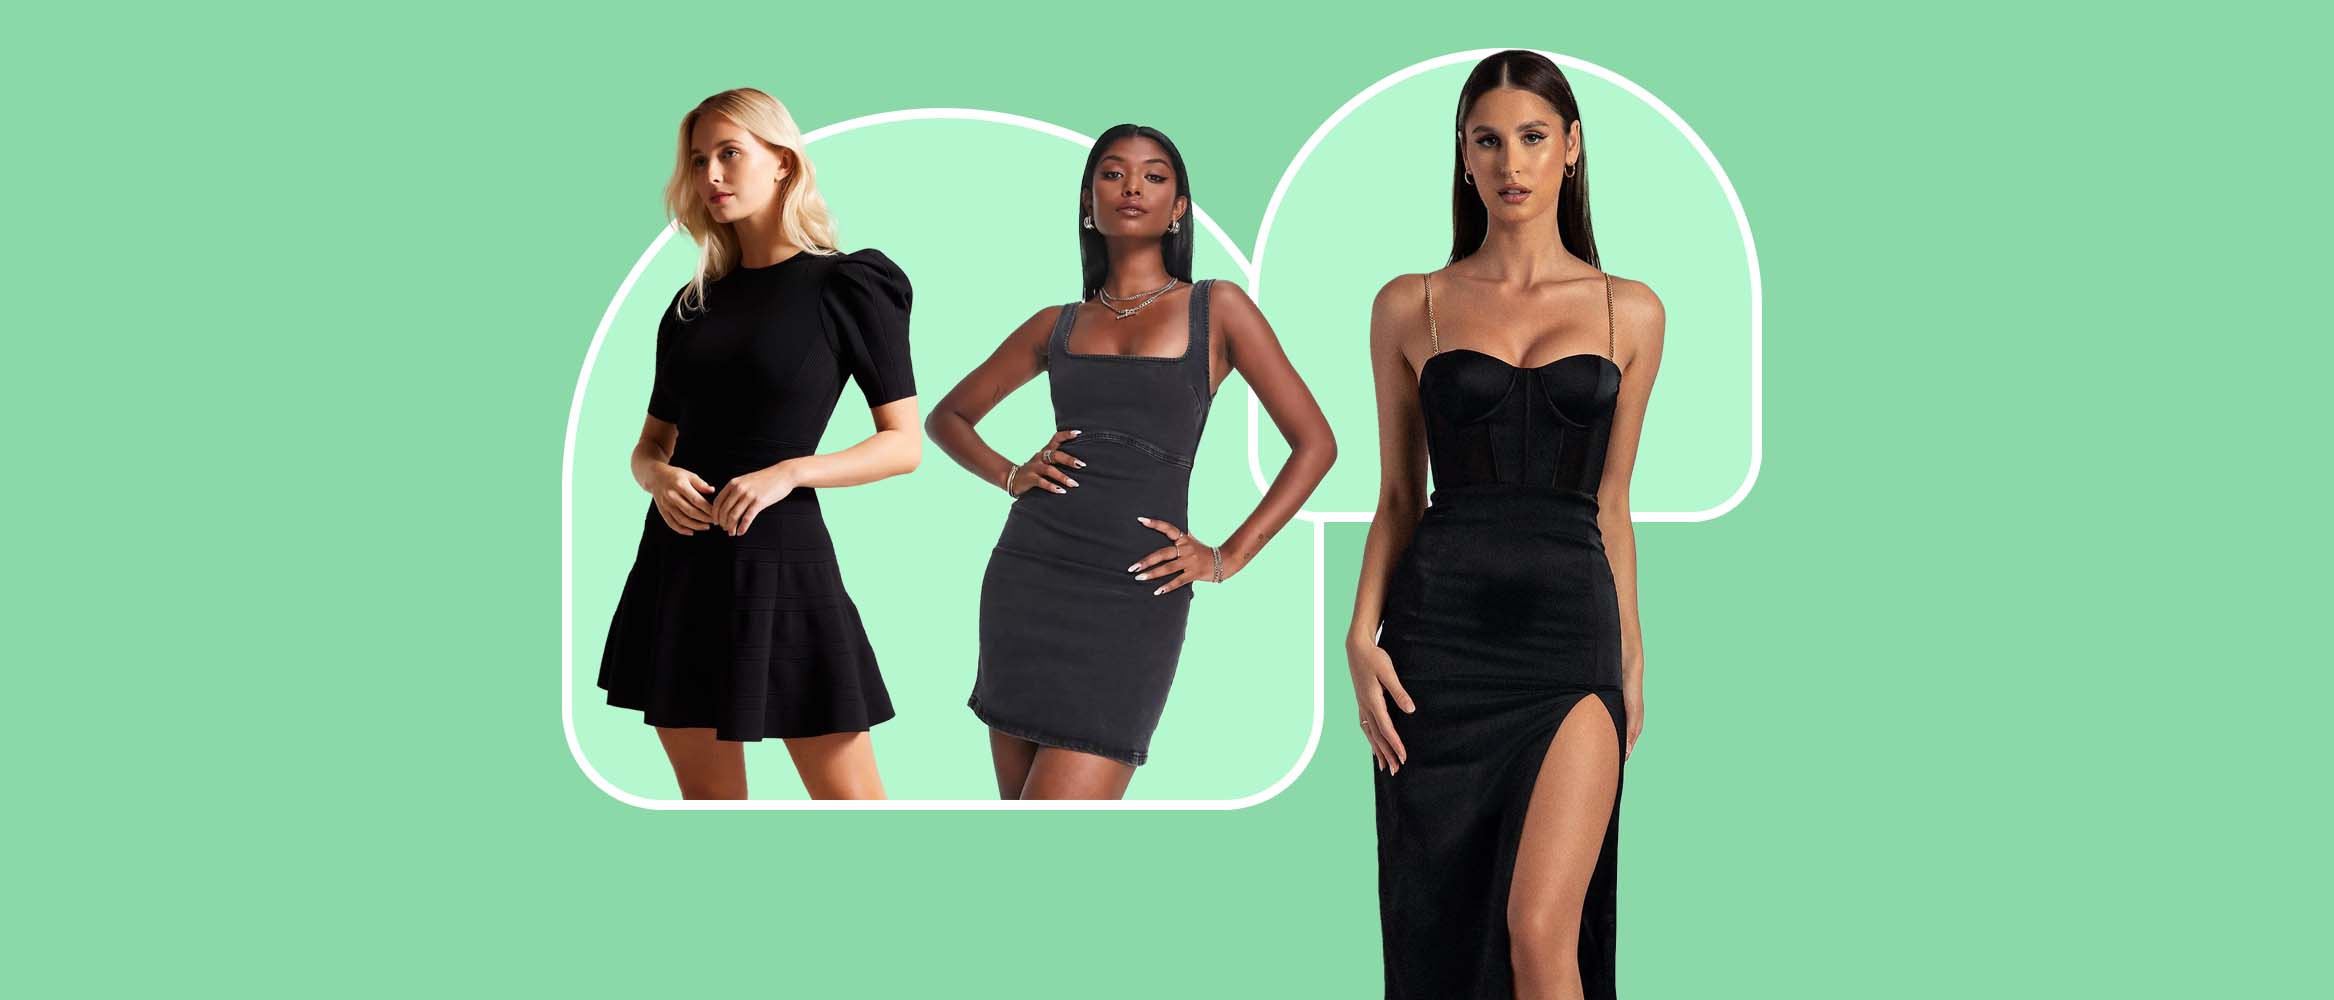 Little black dress is having a revival for fall: Clotheslines 